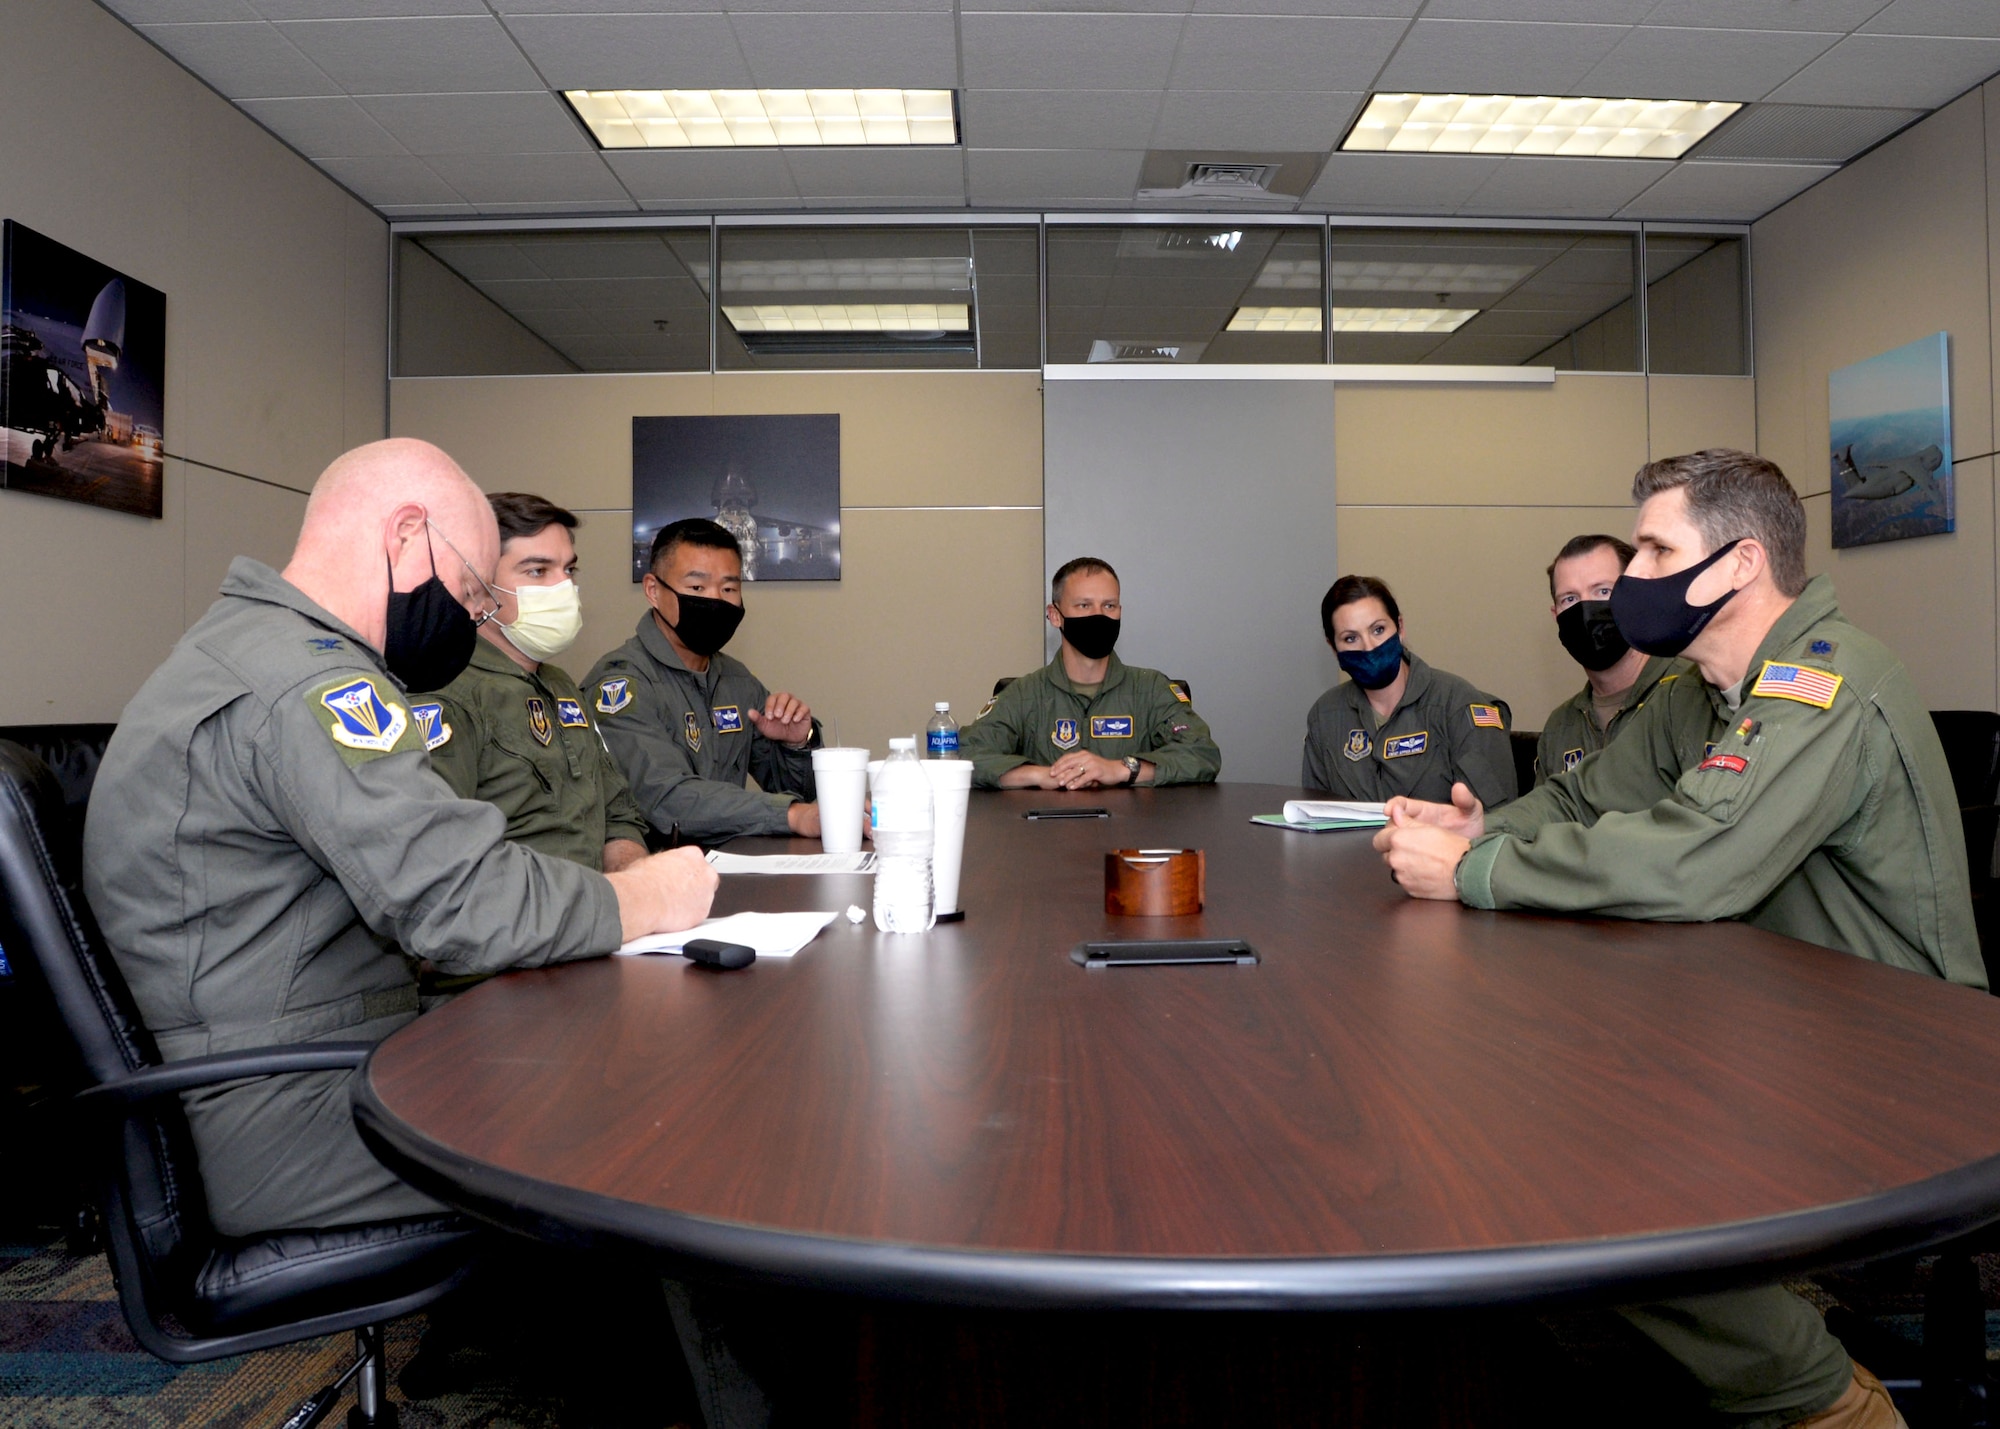 Sitting far right, Lt. Col. Seth Asay, 733rd Training Squadron commander, speaks with 4th Air Force A3 team members during their visit to the 433rd Airlift Wing, April 9, 2021, at Joint Base San Antonio-Lackland, Texas. The team learned about potential deficiencies in training with the goal to assist facilitation of improvements to 4th AF leadership. (U.S. Air Force photo by Tech. Sgt. Samantha Mathison)